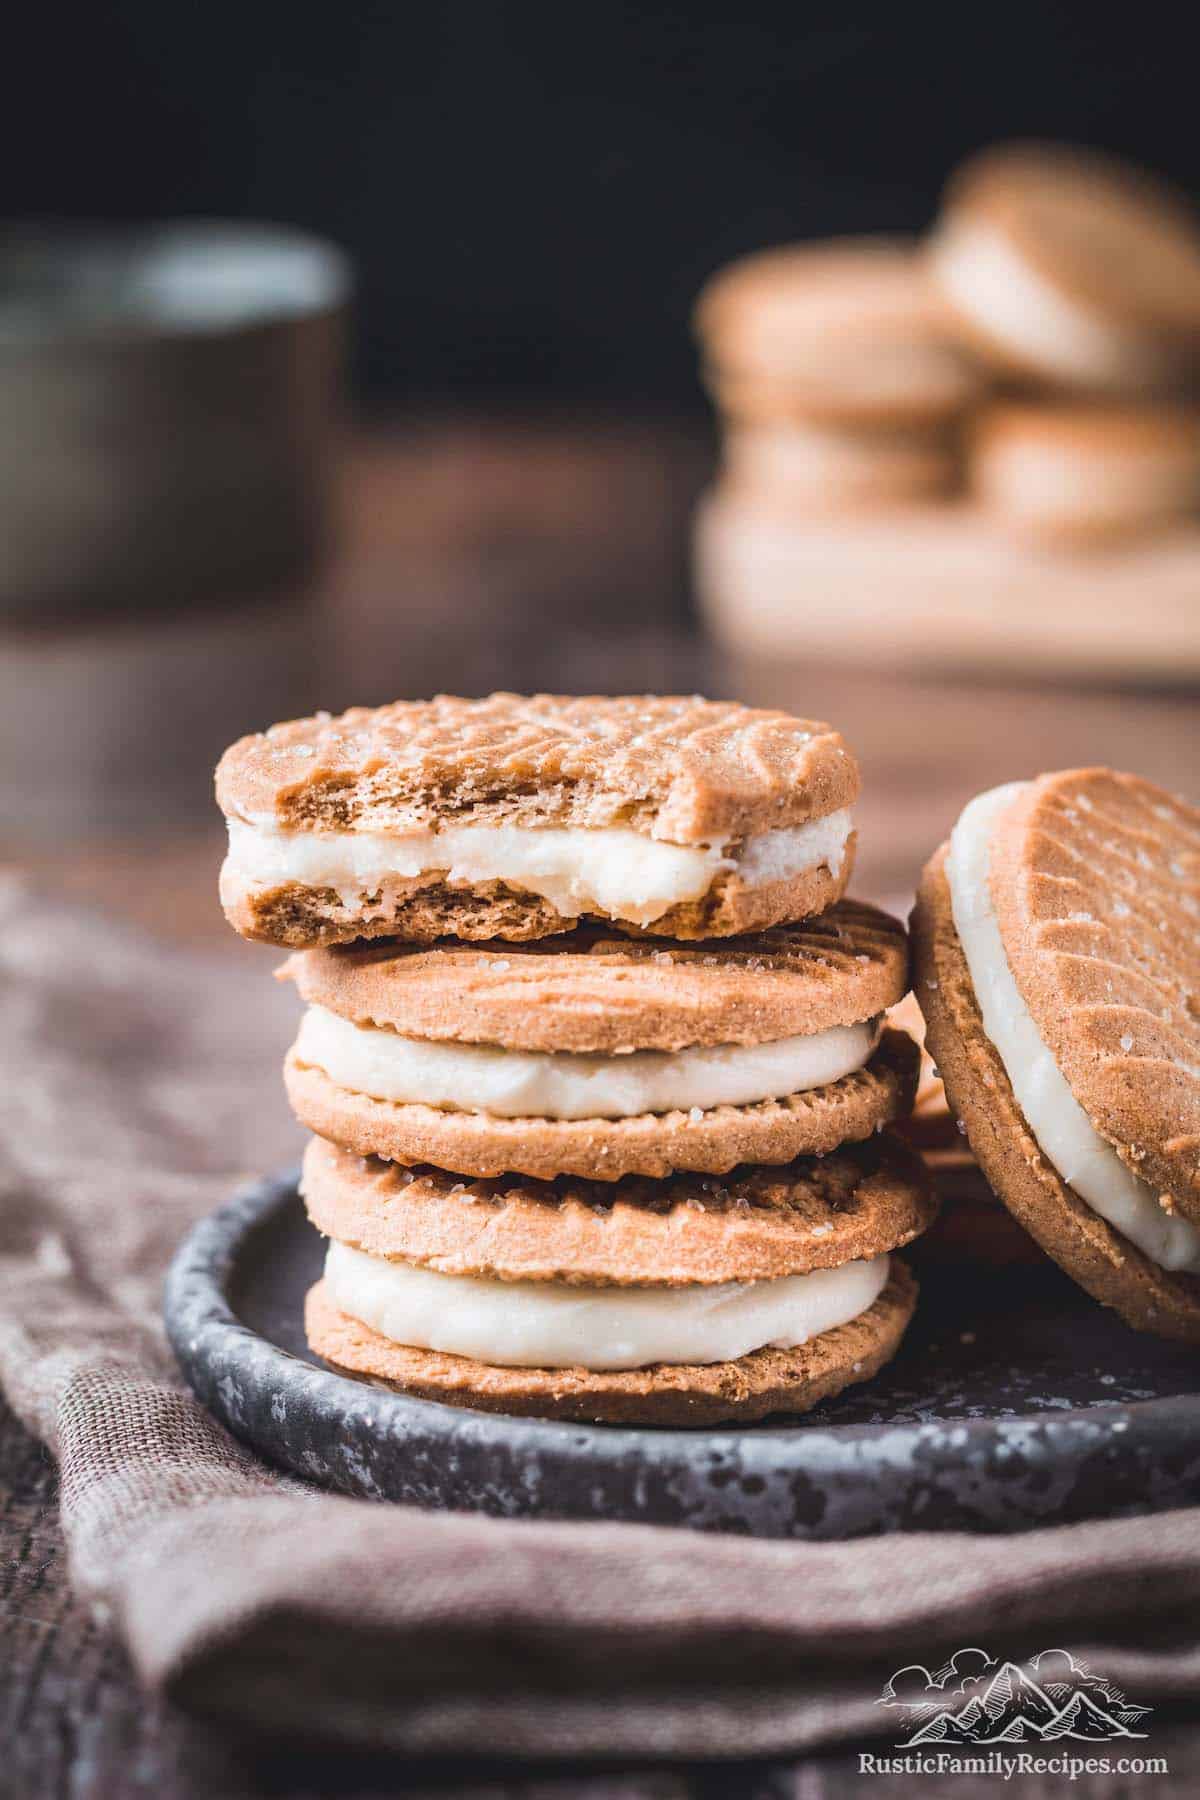 A stack of three Biscoff cookies with a bite missing from the top one.